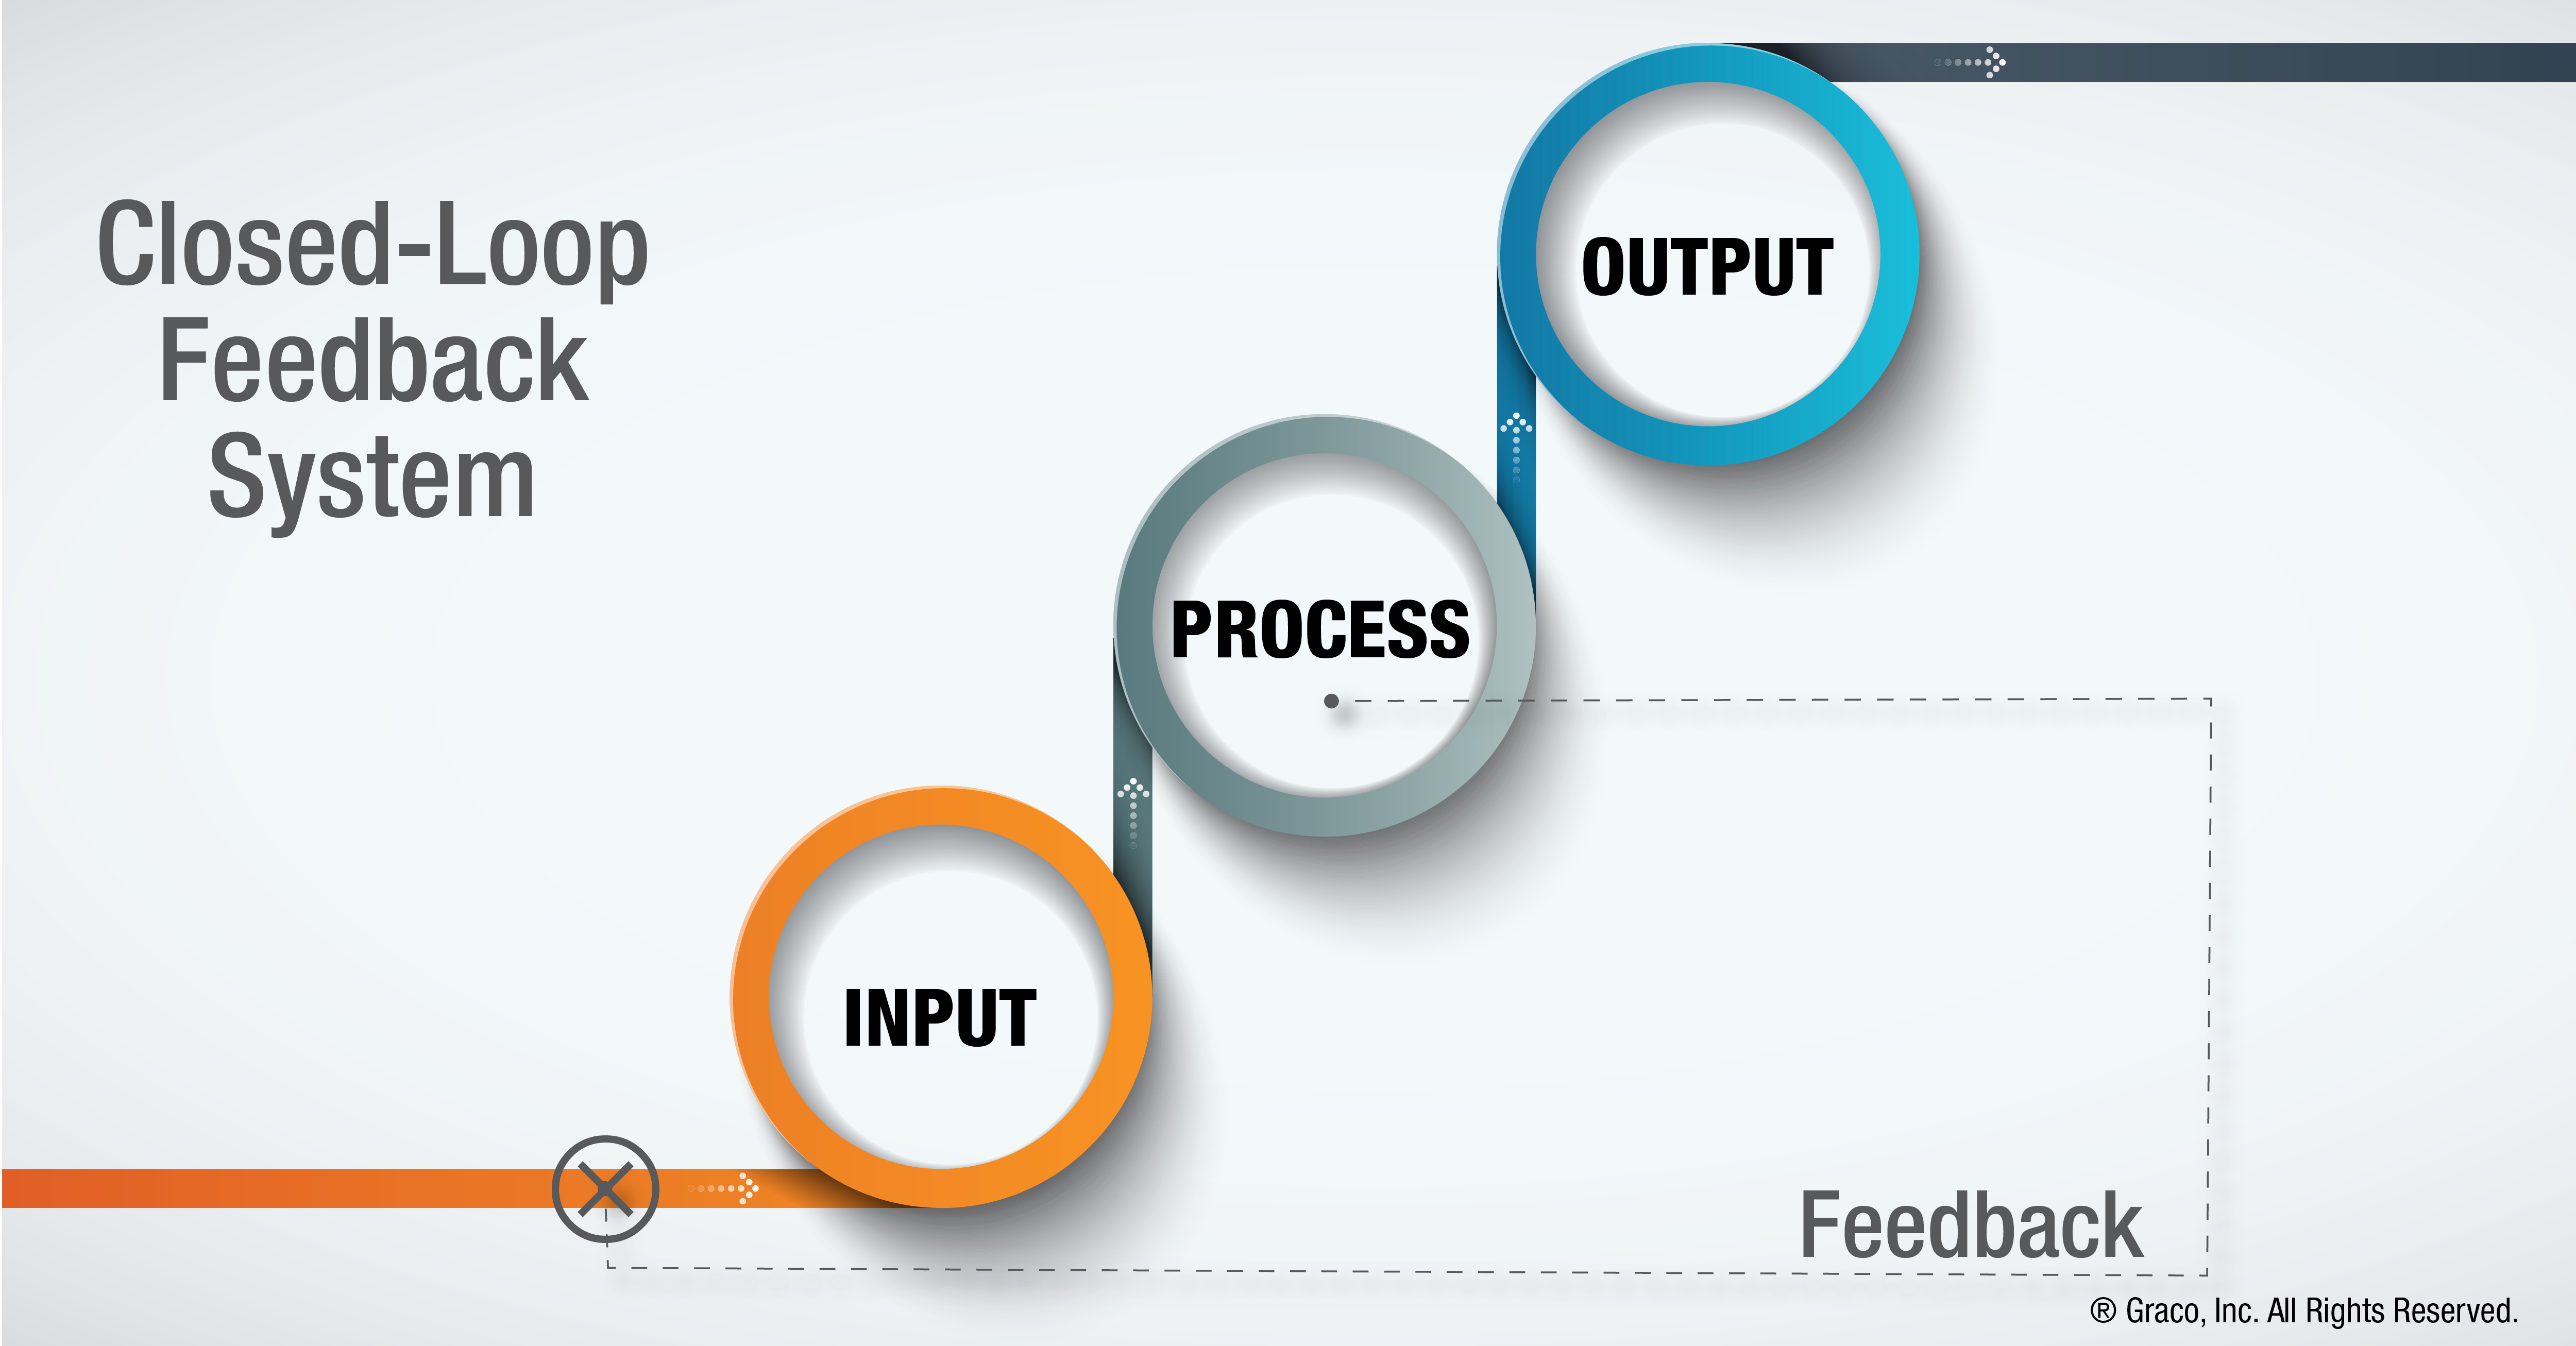 Closed loop feedback system diagram shows flow from input to process output. At the process step is a line going back input, indicating feedback.